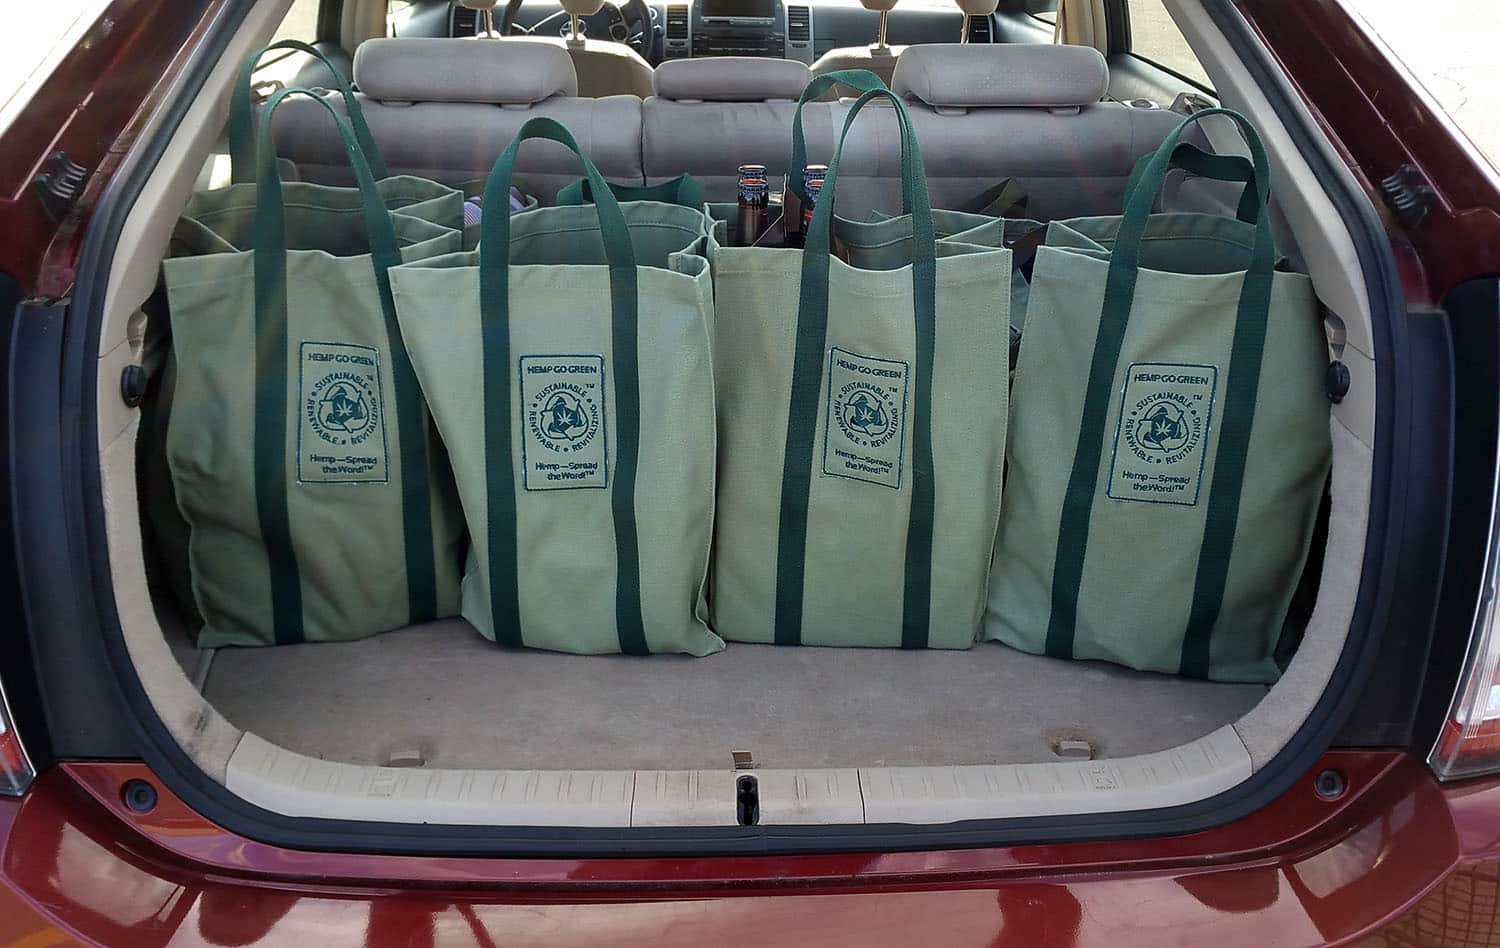 A Recent Trip to the Grocery Store with Our Reusable Shopping Bags